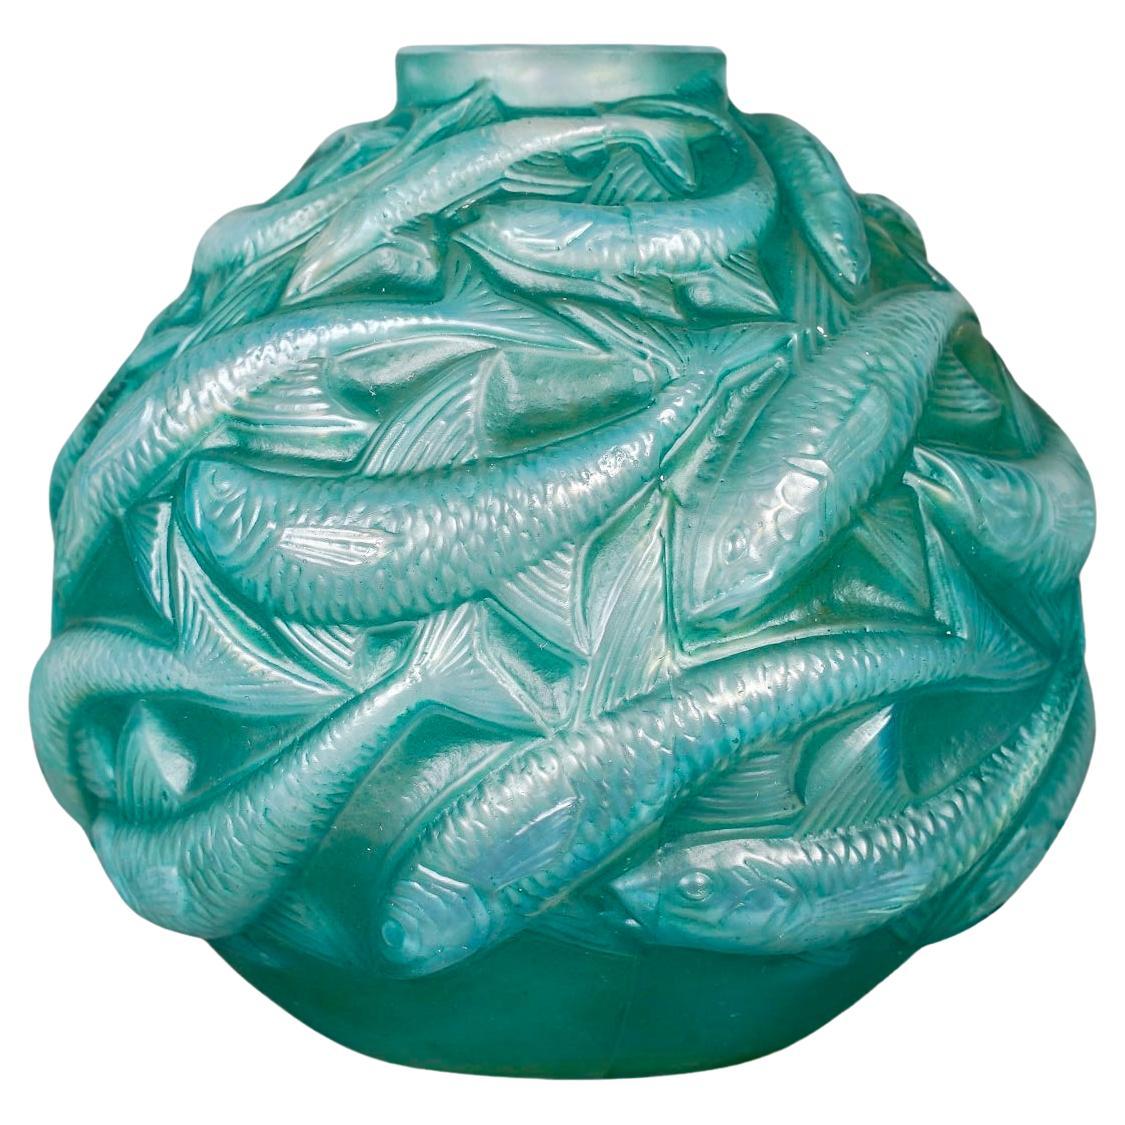 1927 René Lalique Vase Oleron Cased Opalescent Glass with Green Patina